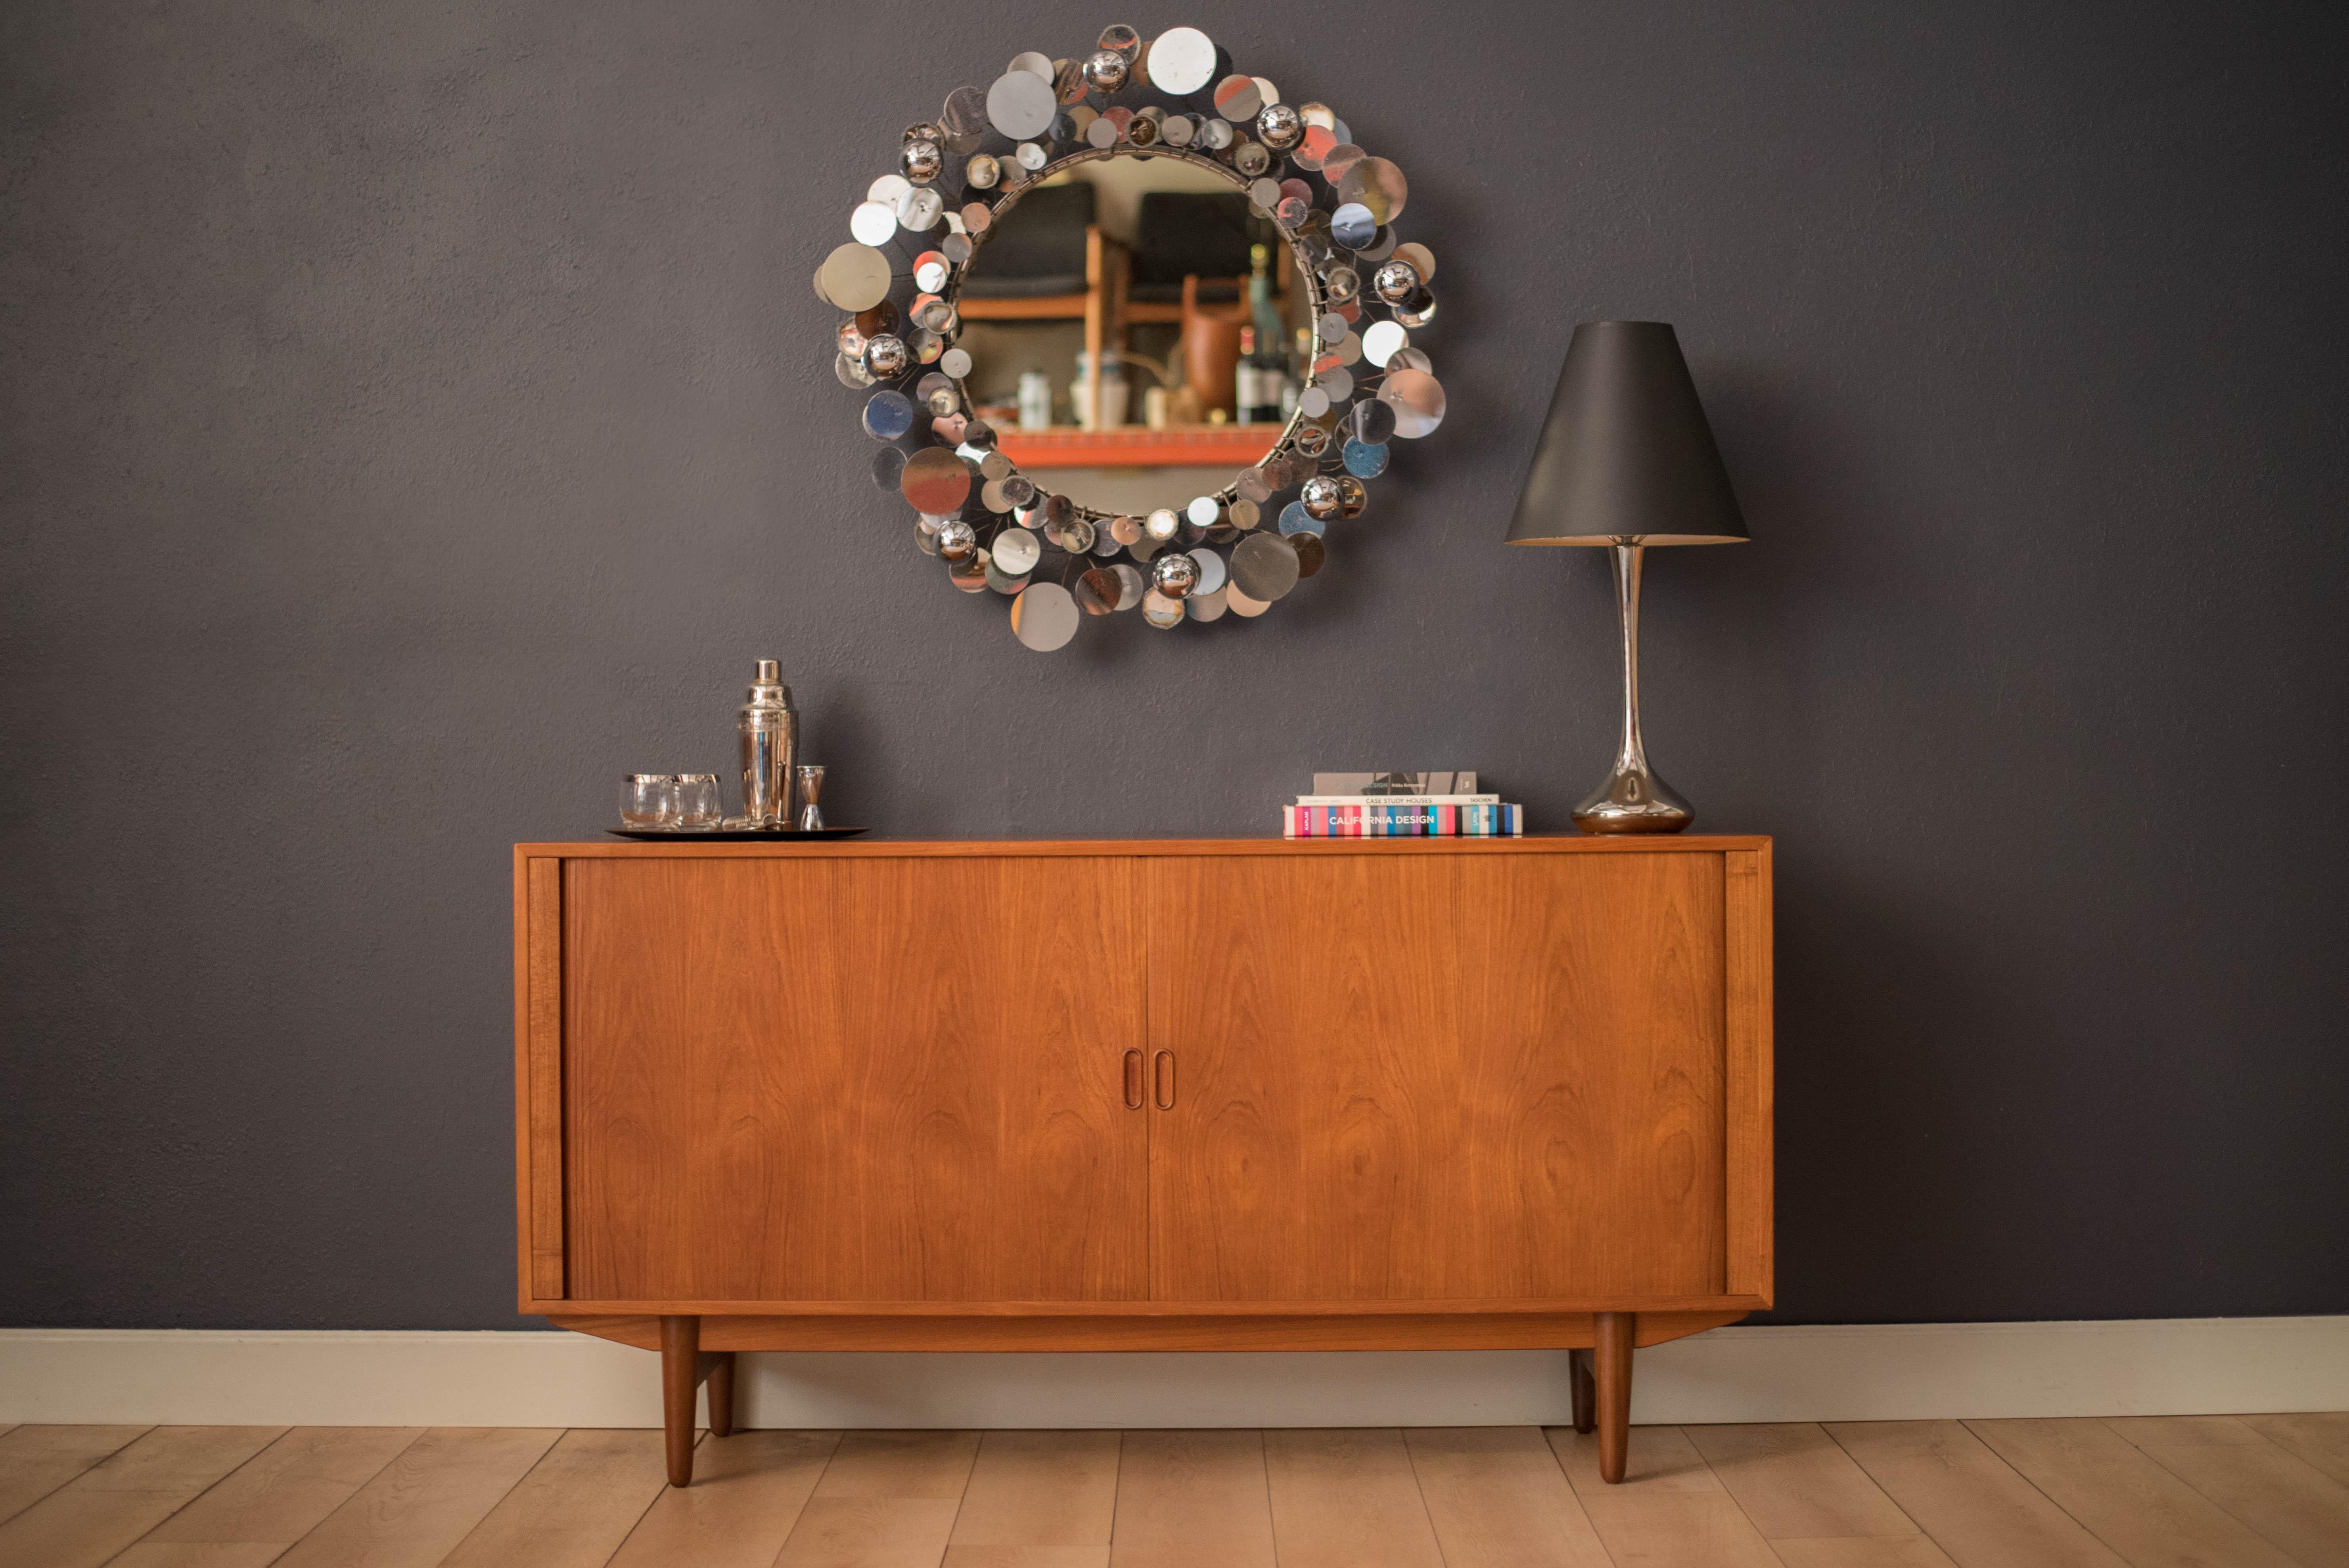 Mid-Century Modern raindrops sculpture mirror designed by Curtis Jere for Artisan House, c. 1970's. This decorative round wall mirror features reflective patterns of chrome and mixed metals with plenty of vintage patina and aged charm.


Mirror